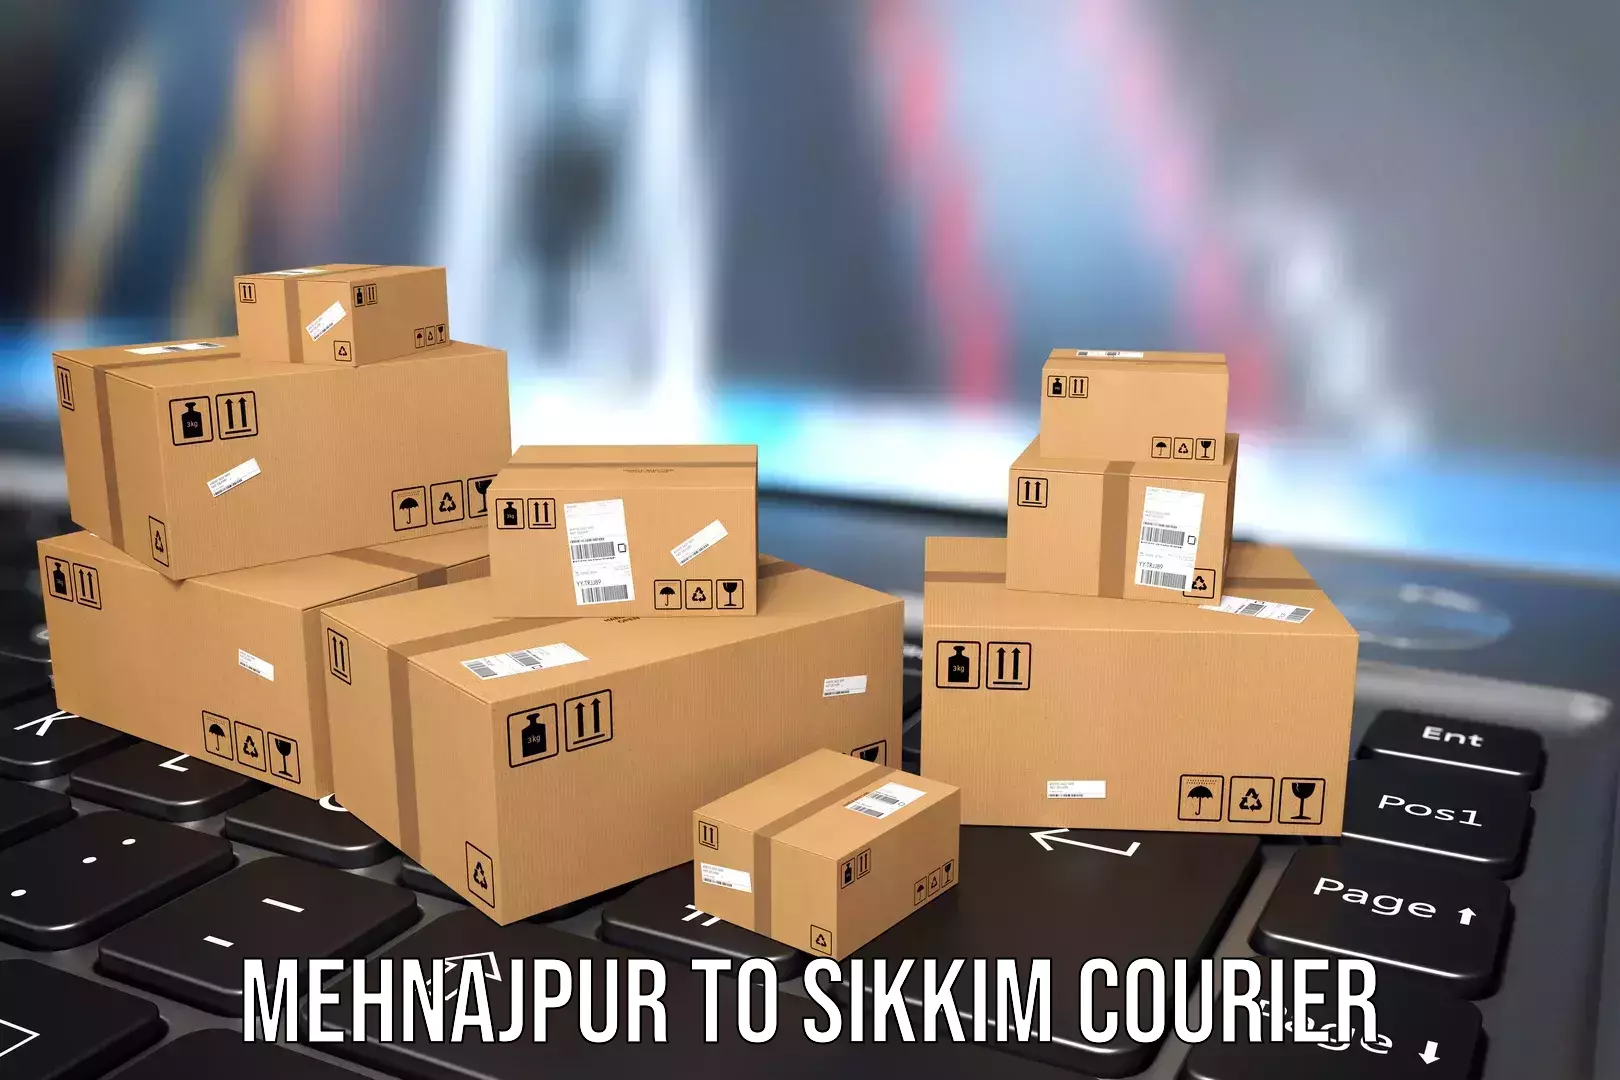 Baggage transport network Mehnajpur to Sikkim